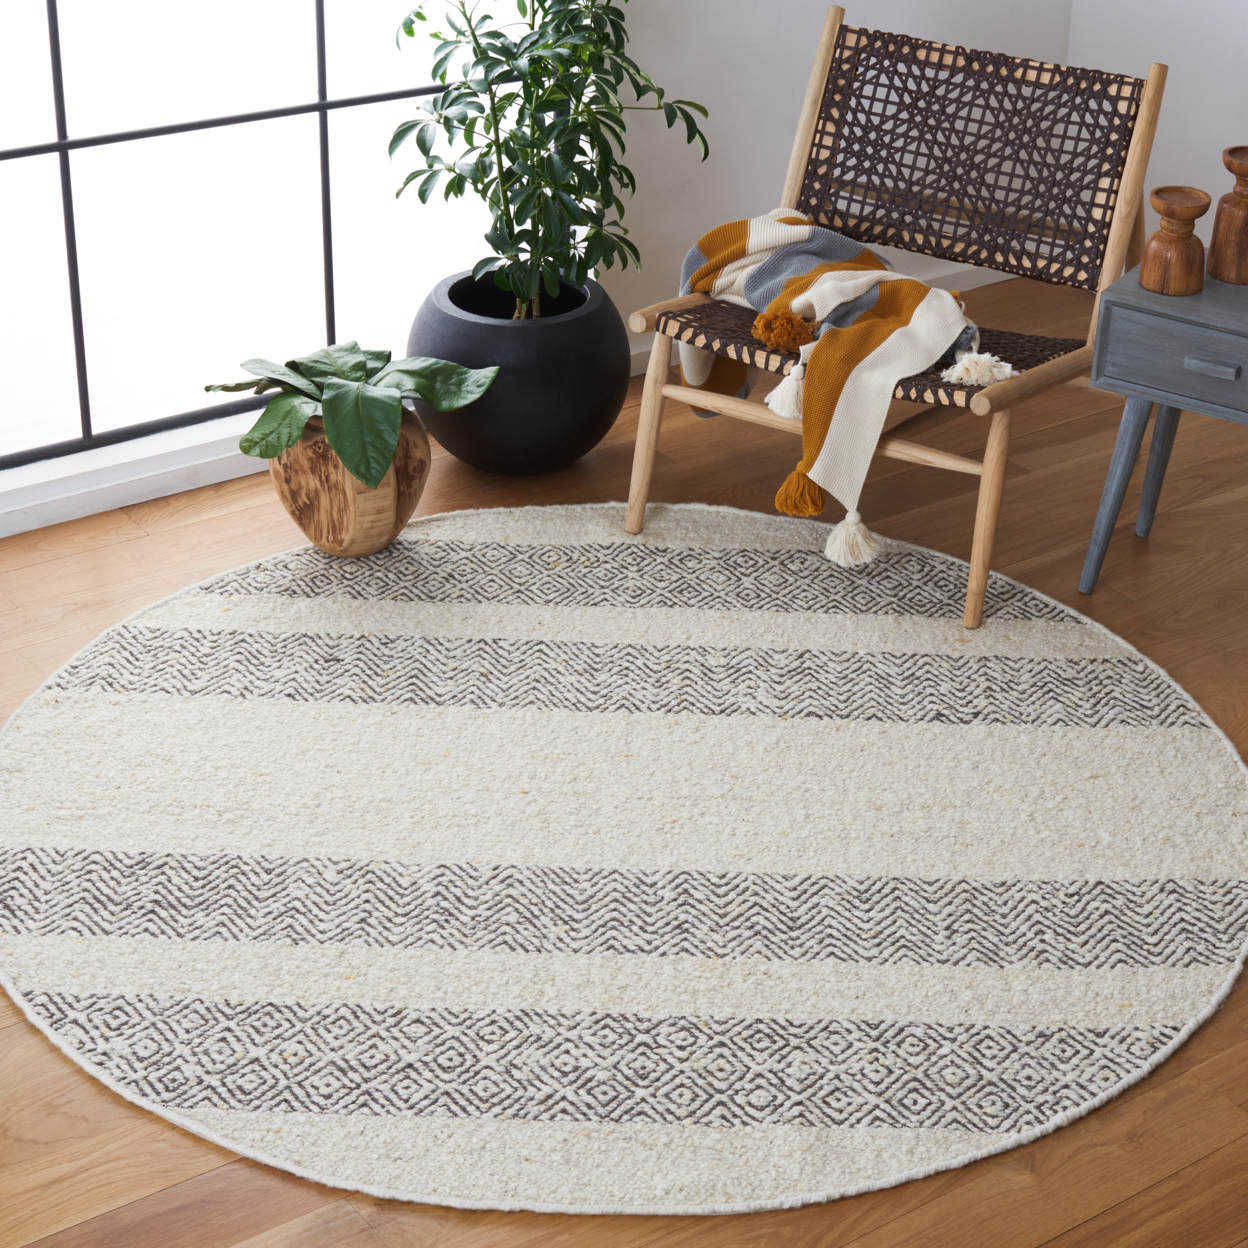 SAFAVIEH Natura Collection NAT332A Handwoven Ivory Rug - 4' X 6'